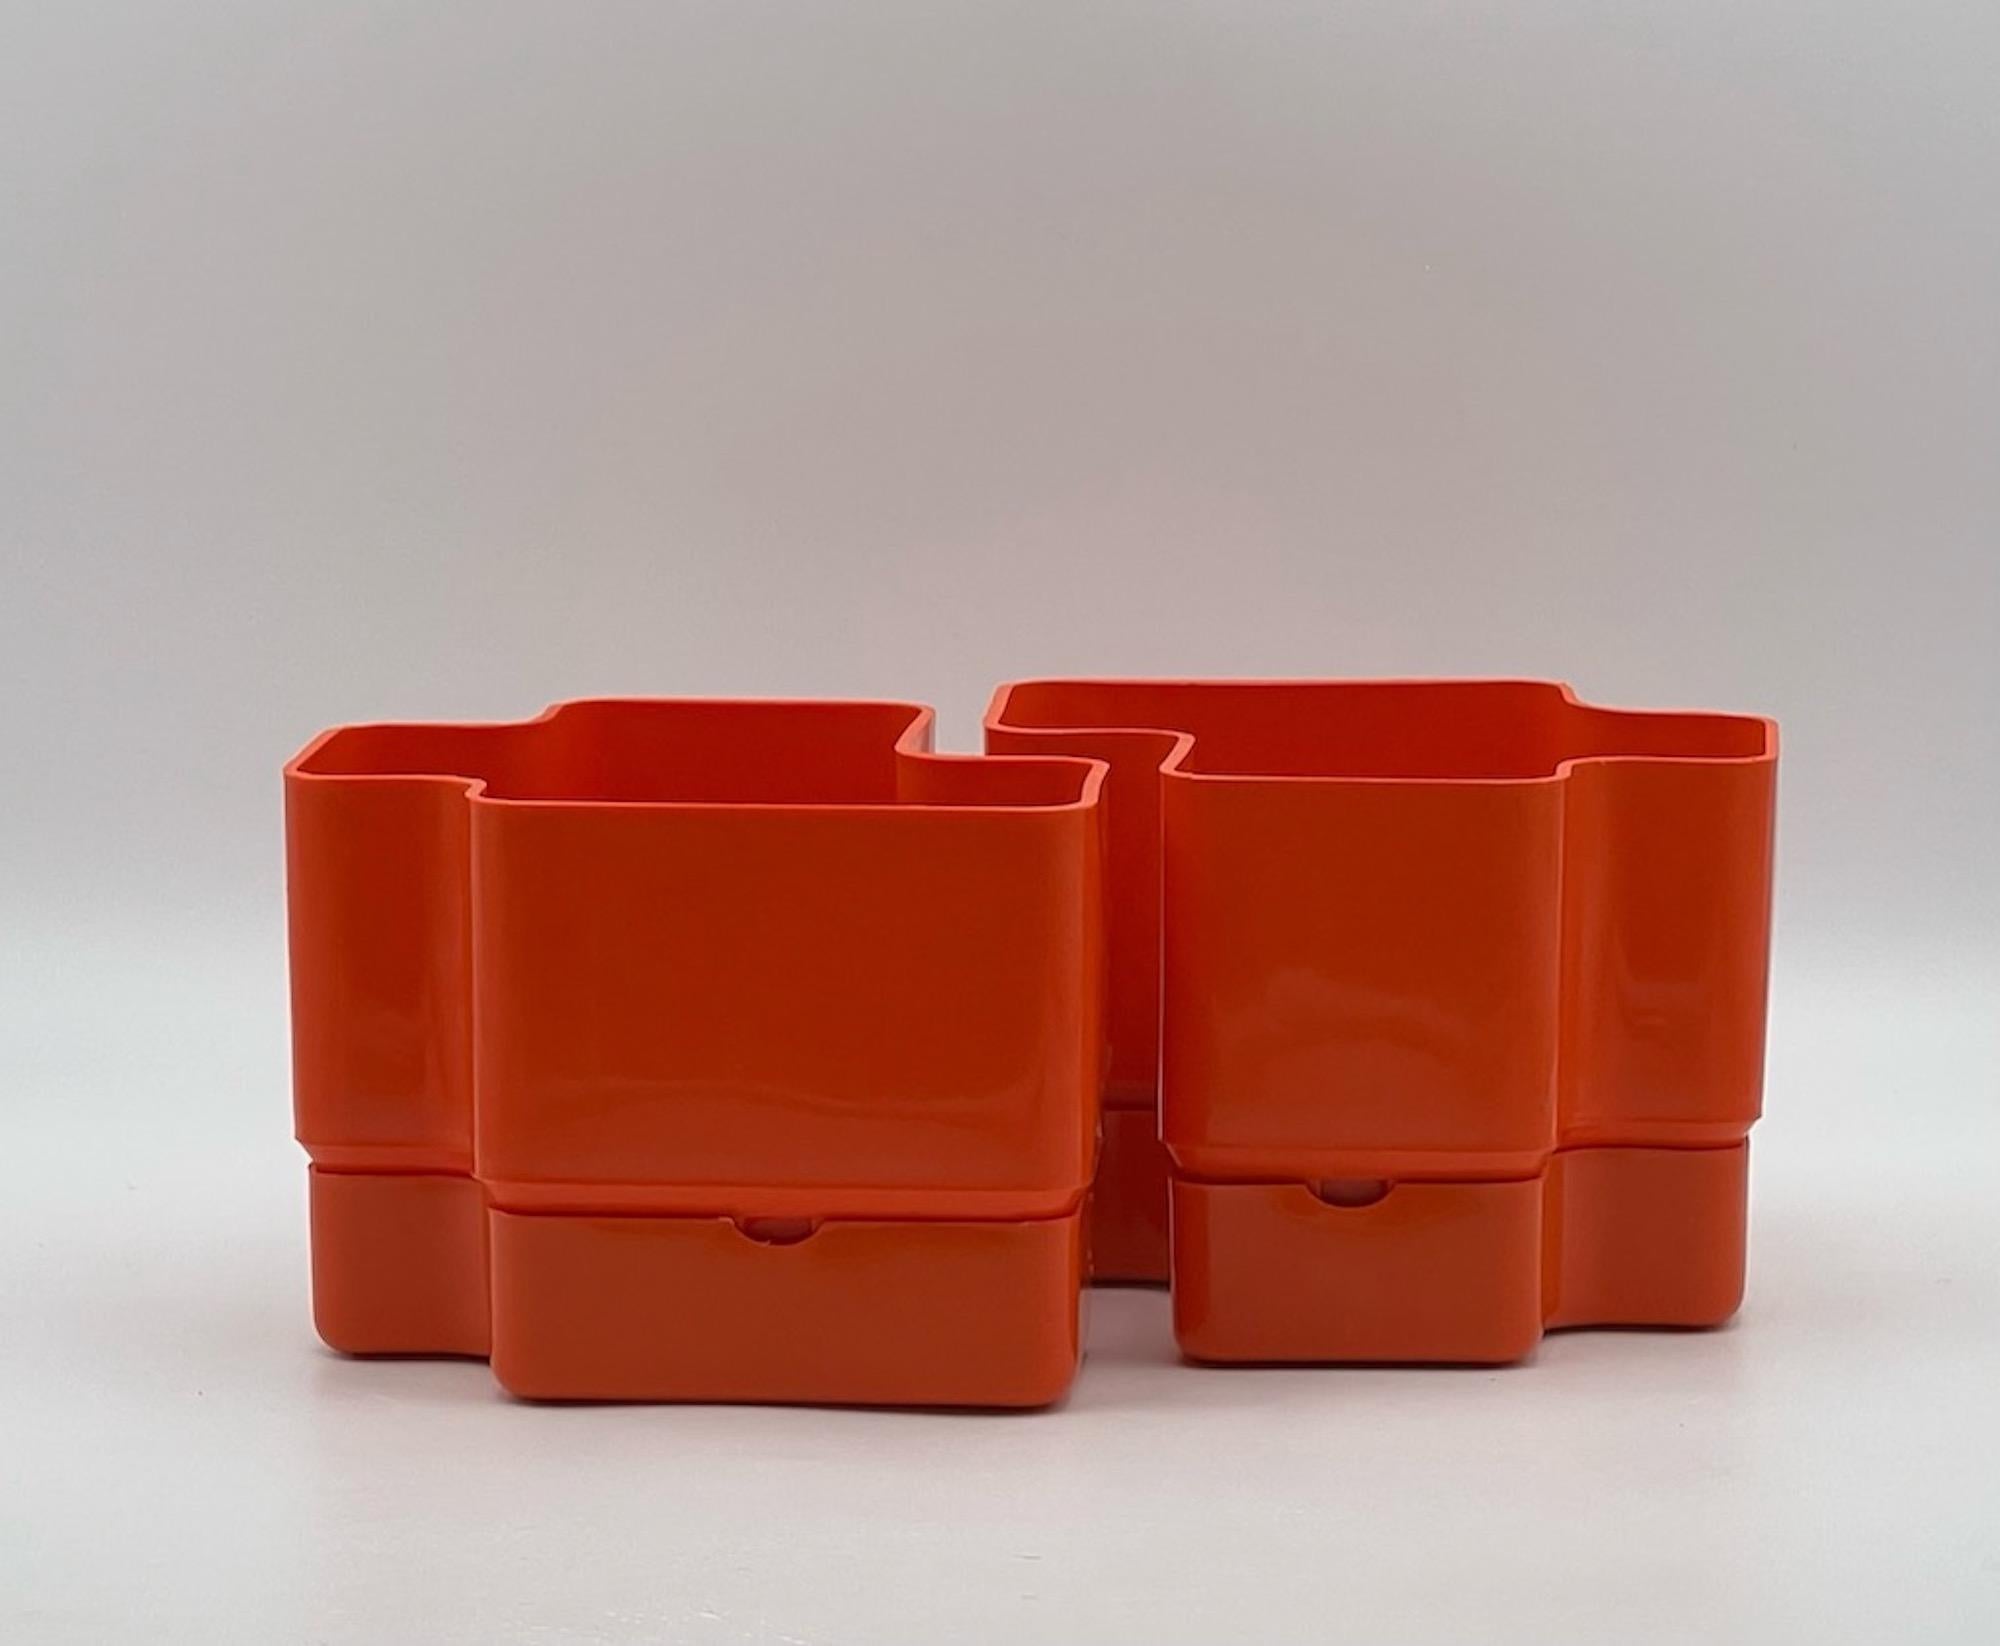  Space Age Plastic Planters by Programma Vastill, 1970s, Set of 2 In Good Condition For Sale In San Benedetto Del Tronto, IT